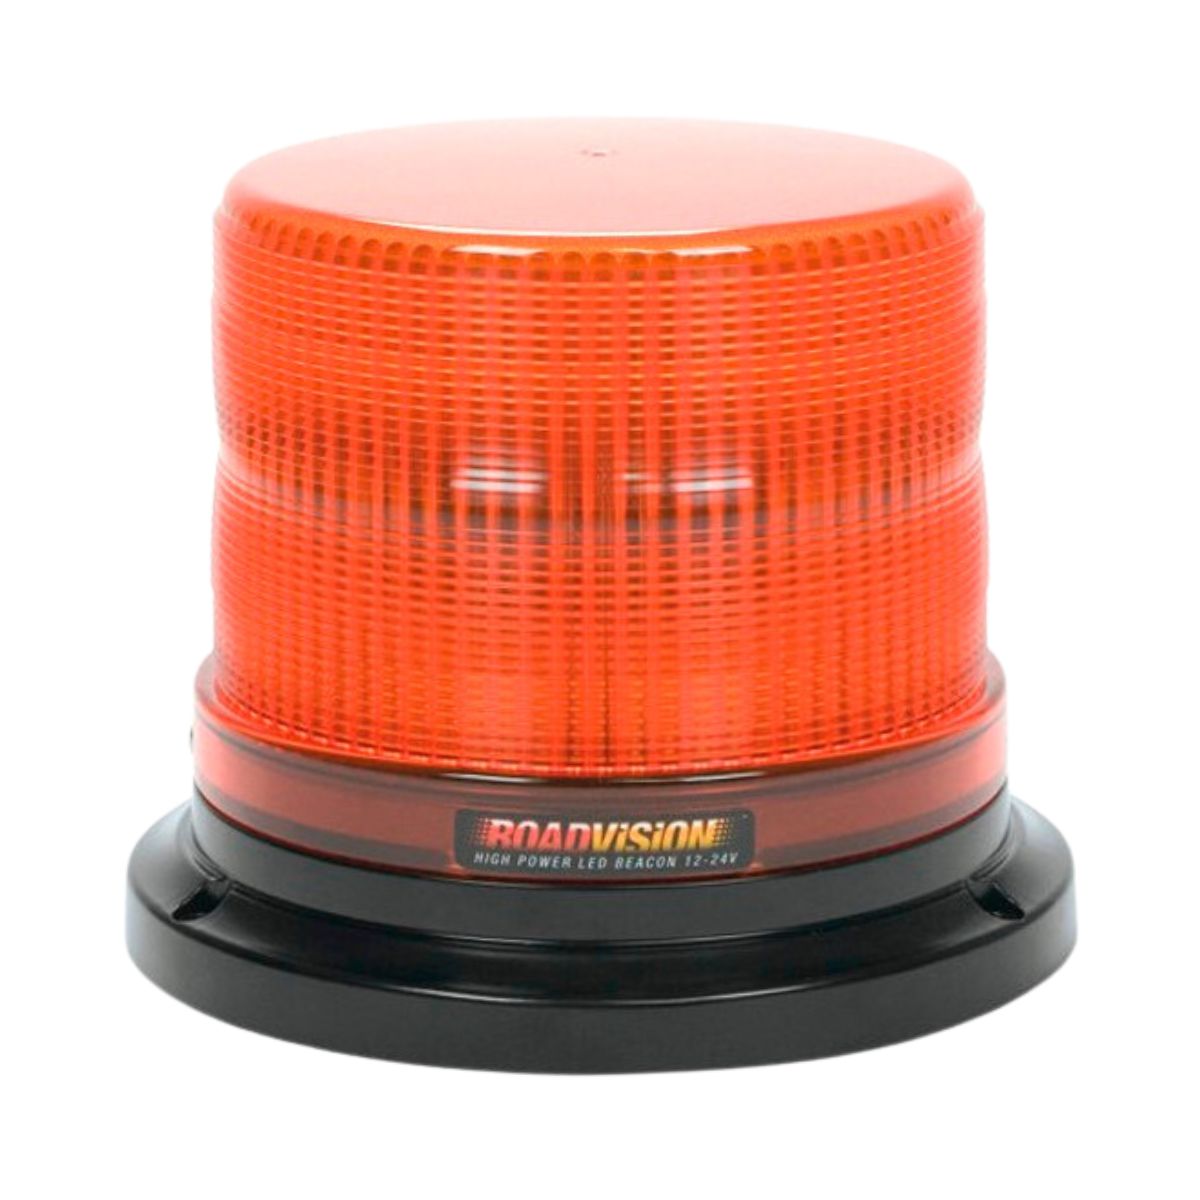 LED Beacon Rotating Amber Fixed RB165Y